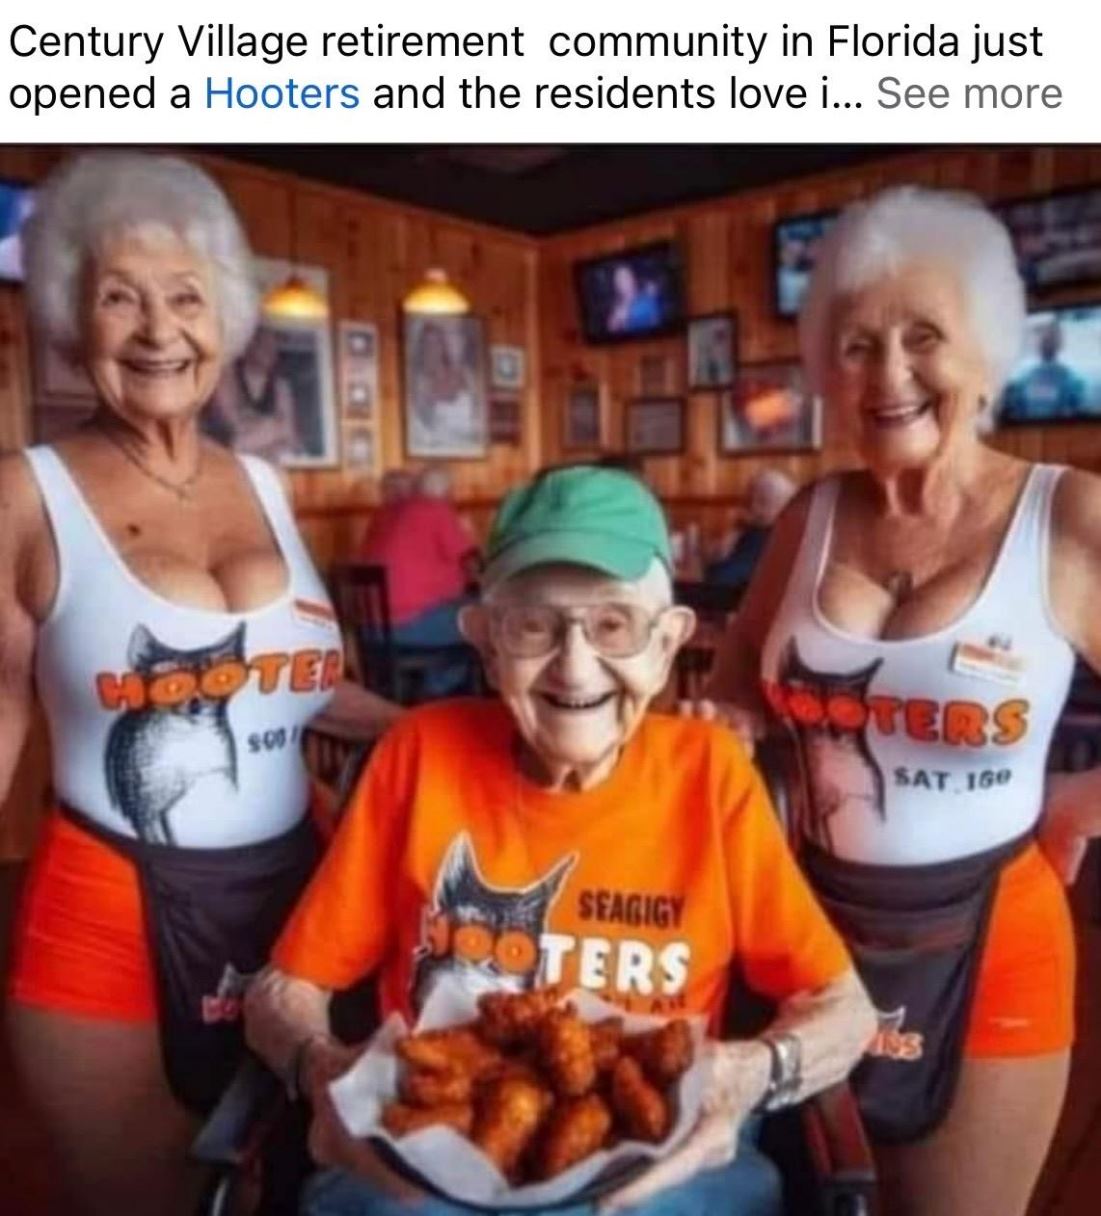 A New Hooters